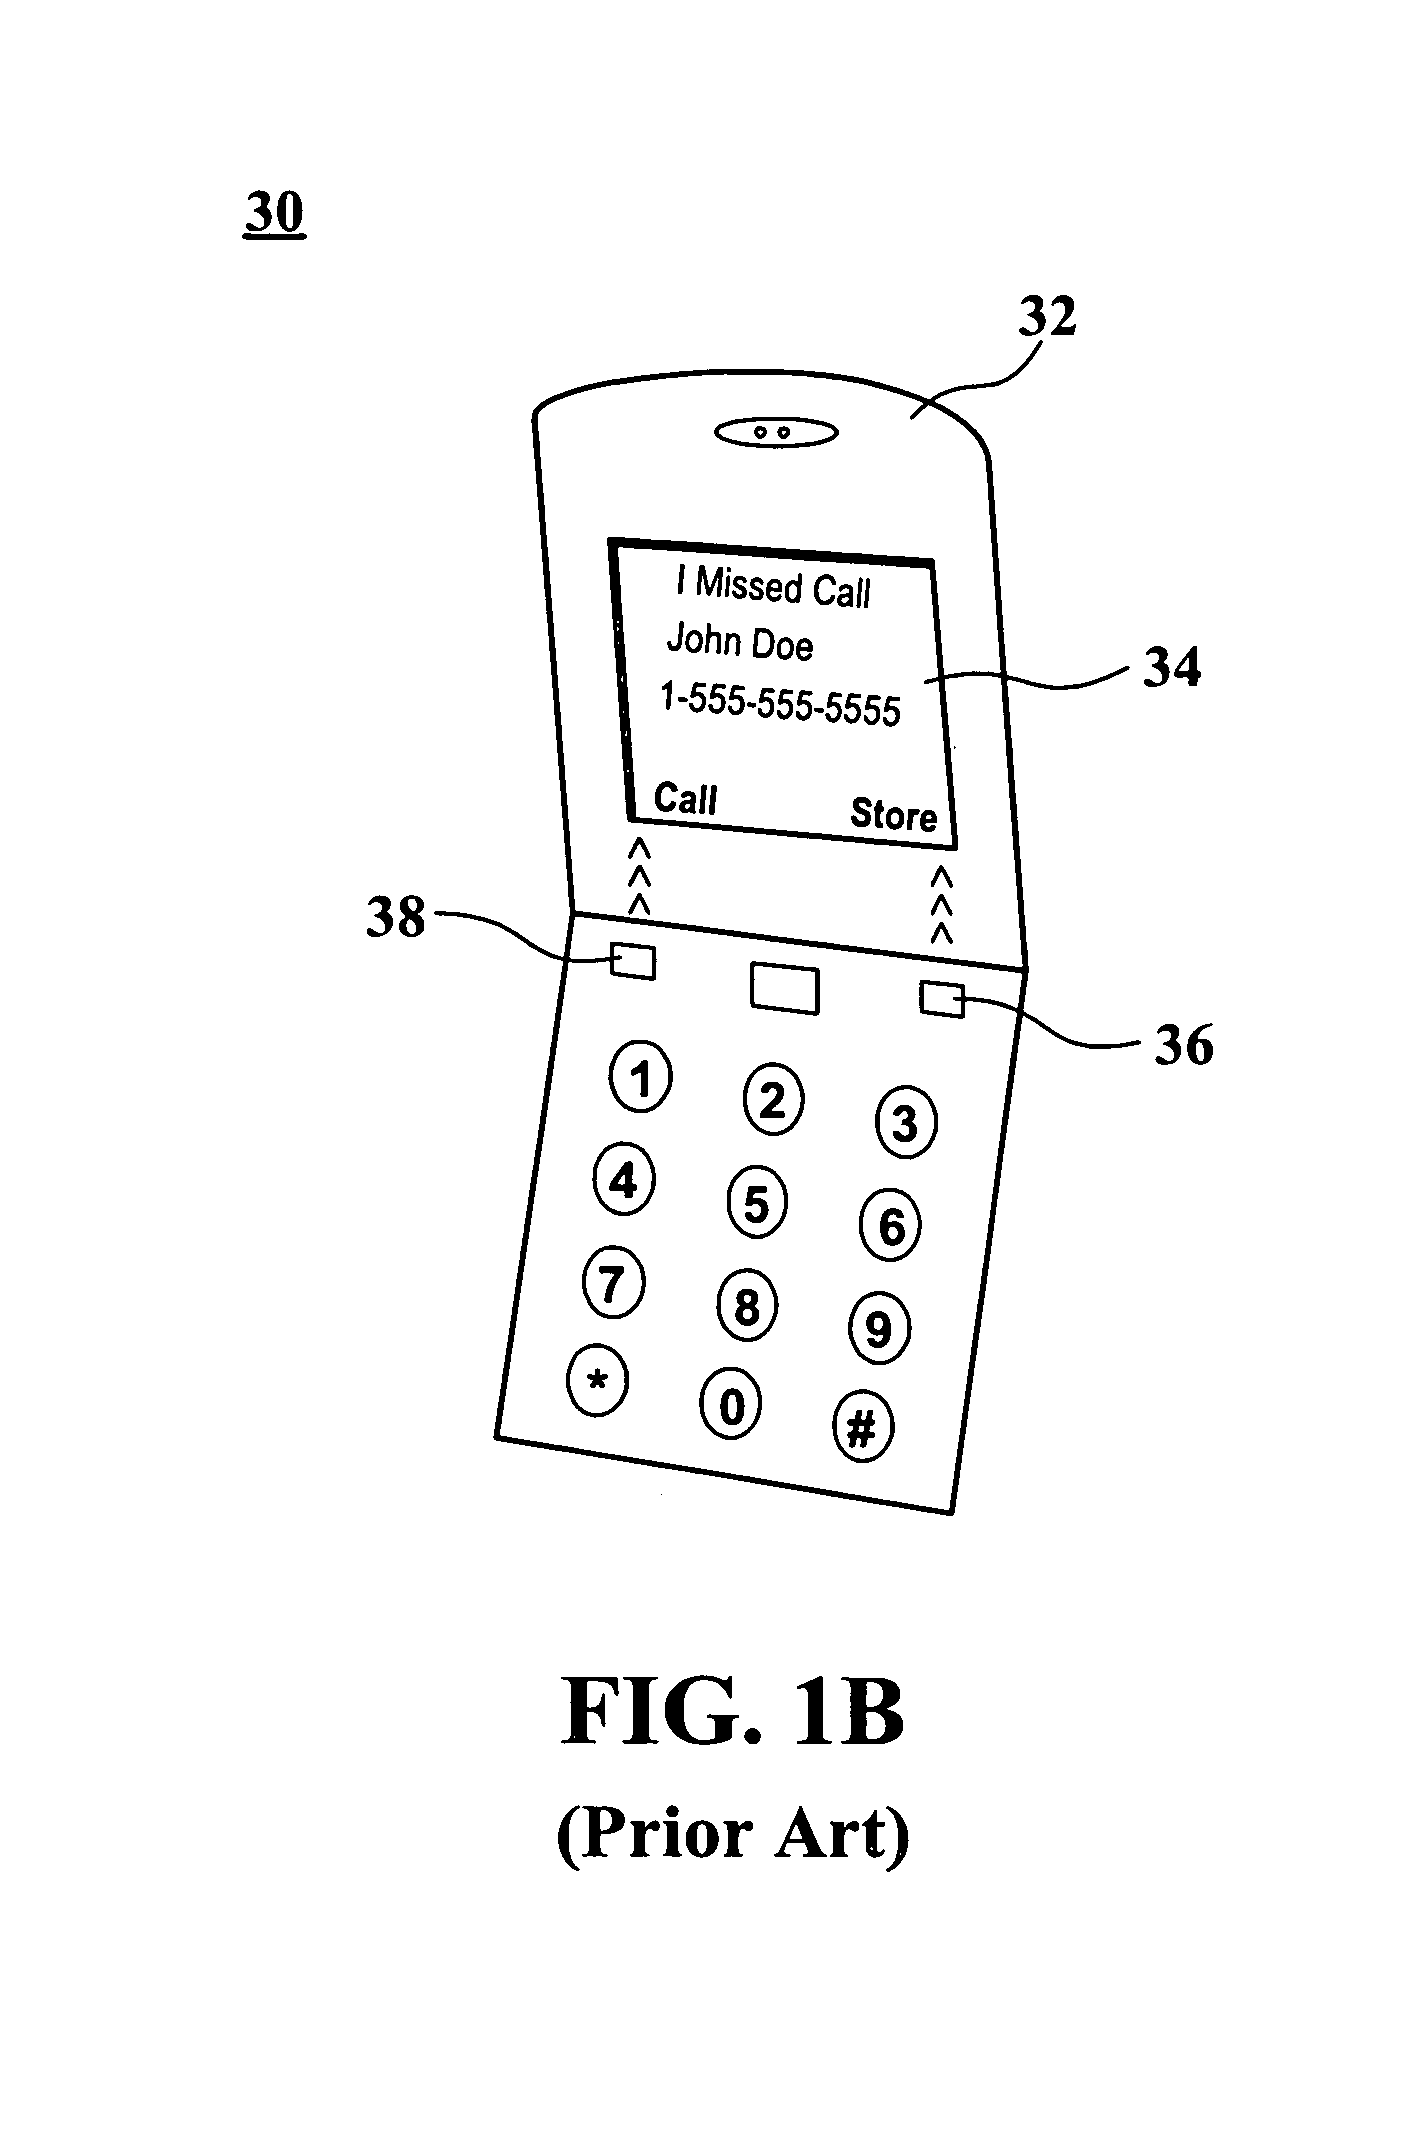 System and method for connecting pending and preset telephone calls to facilitate transitioning to a phone call